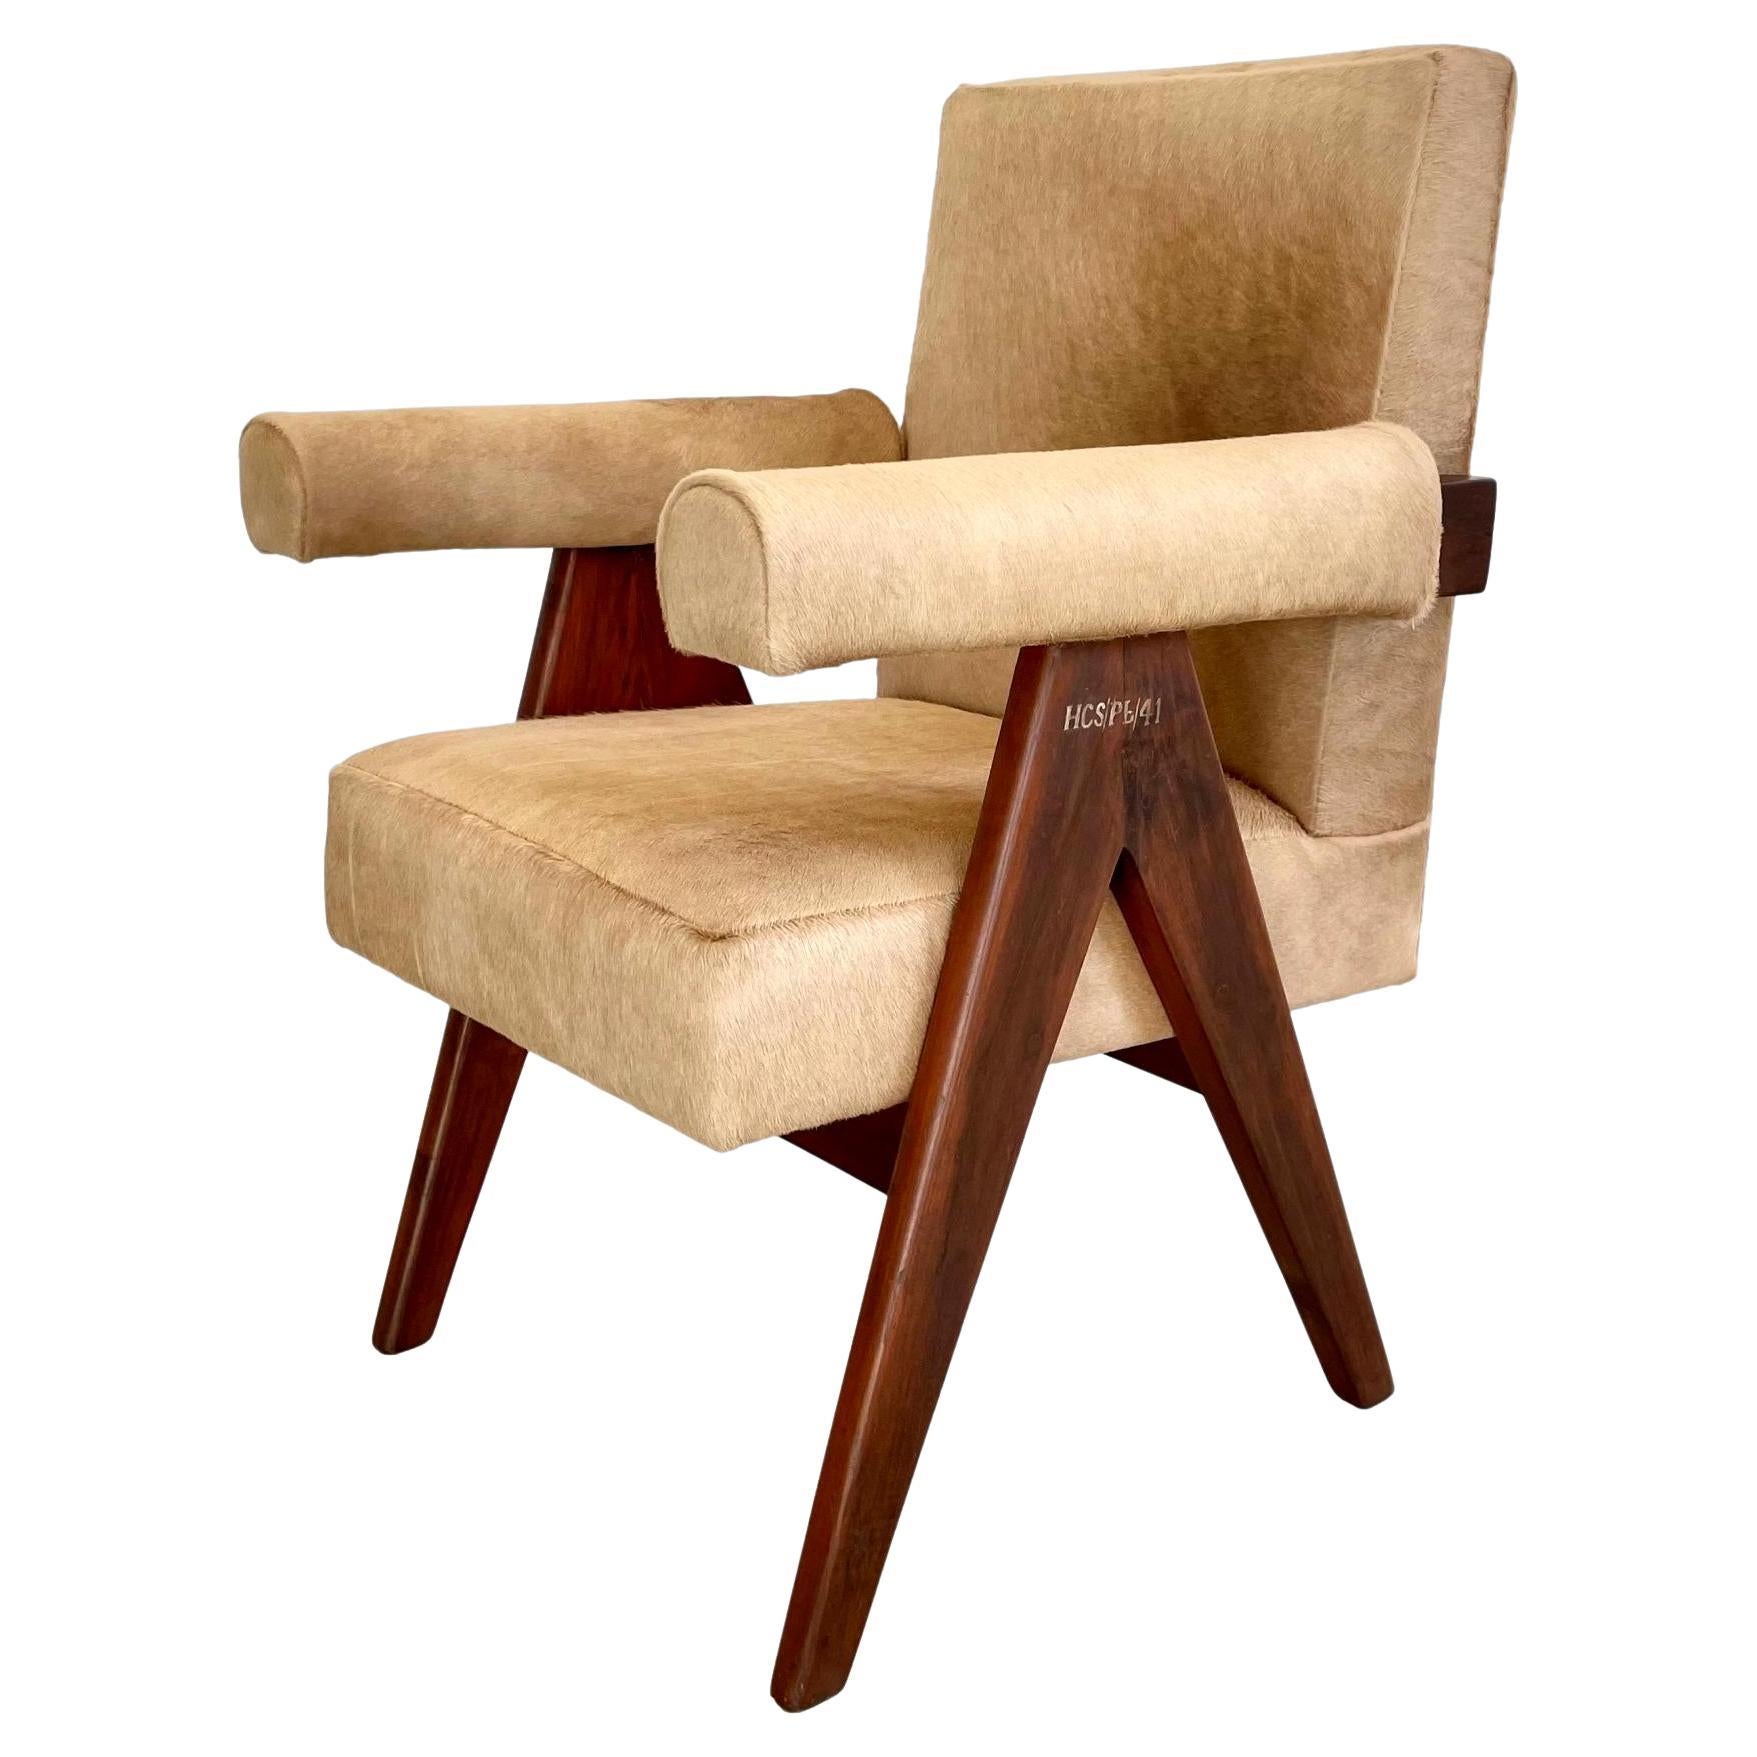 Pierre Jeanneret Senate Chair in Cowhide, 1950s Chandigargh For Sale